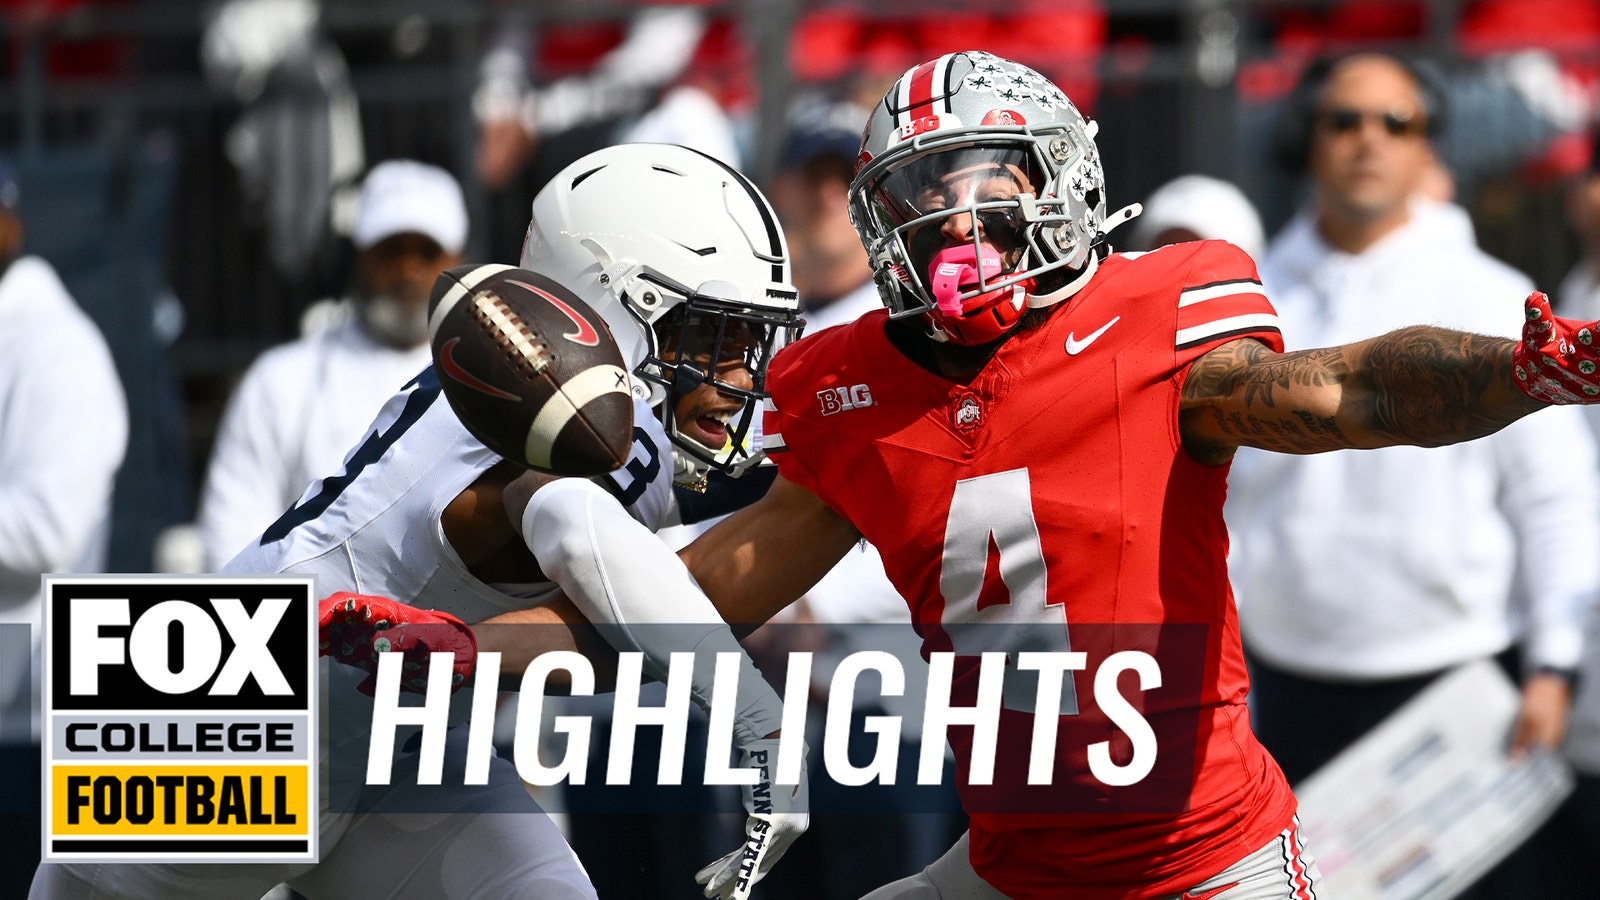 Highlights: Penn State falls to Ohio State